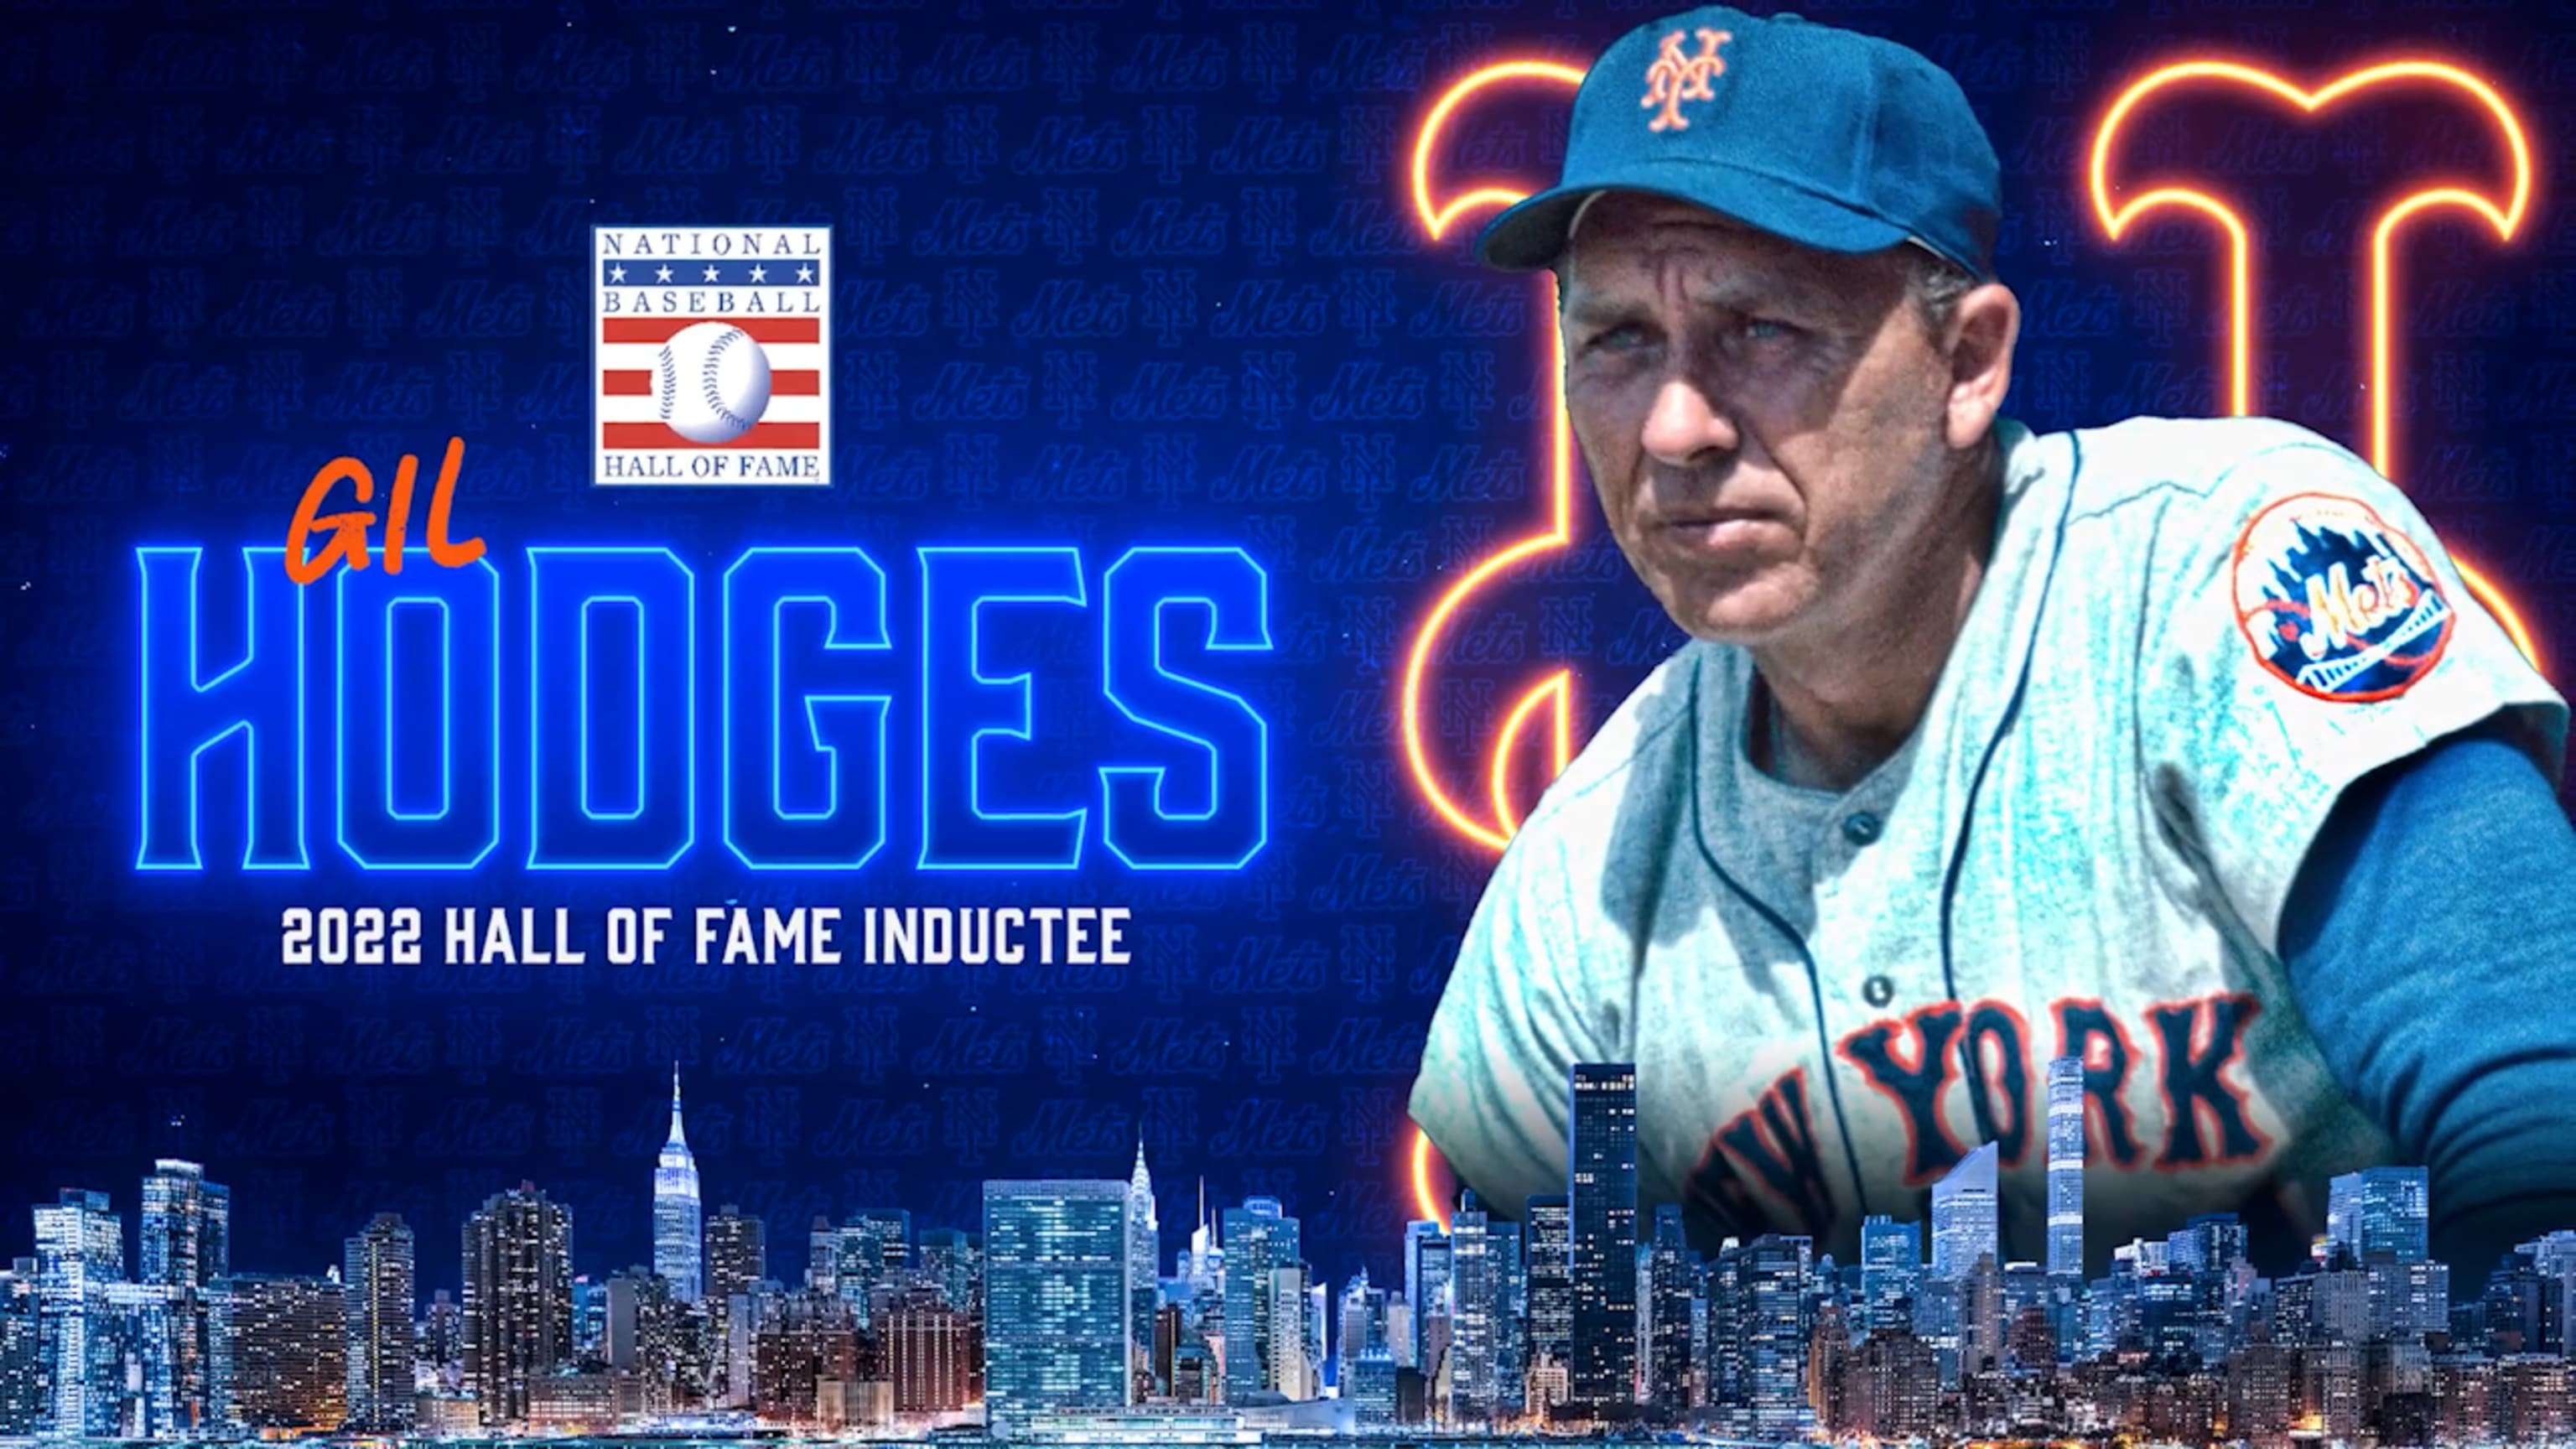 Gil Hodges, 50 years after his tragic death in West Palm Beach, is finally  joining baseball's elite